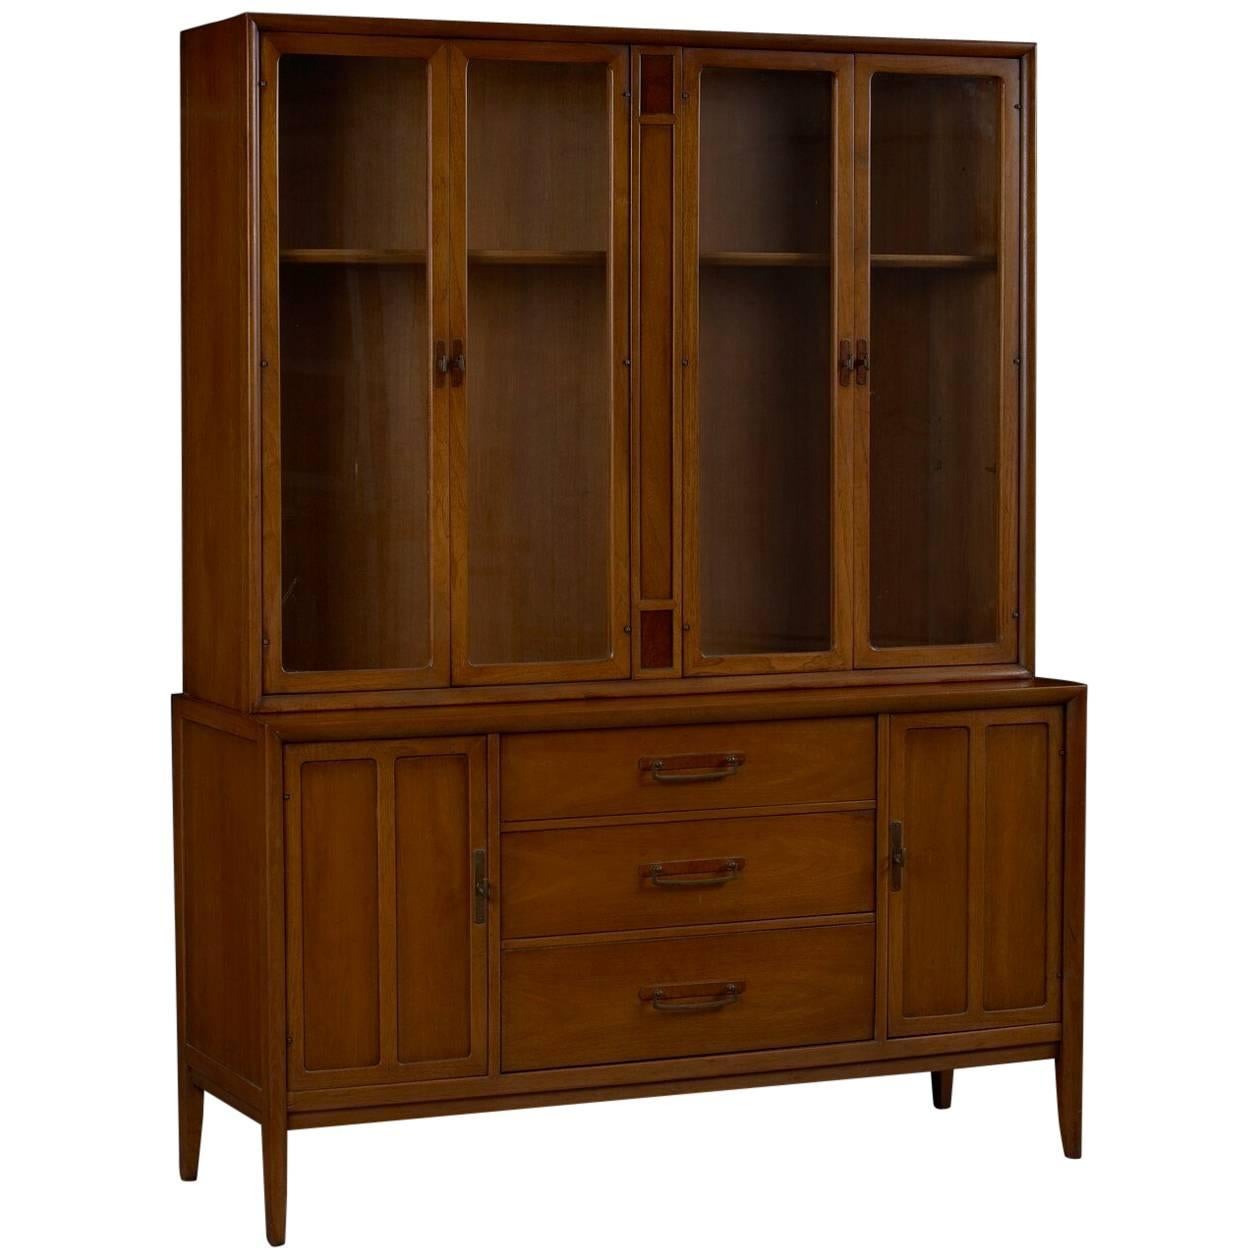 Sideboard and China Cabinet Hutch by James Bouffard for Drexel